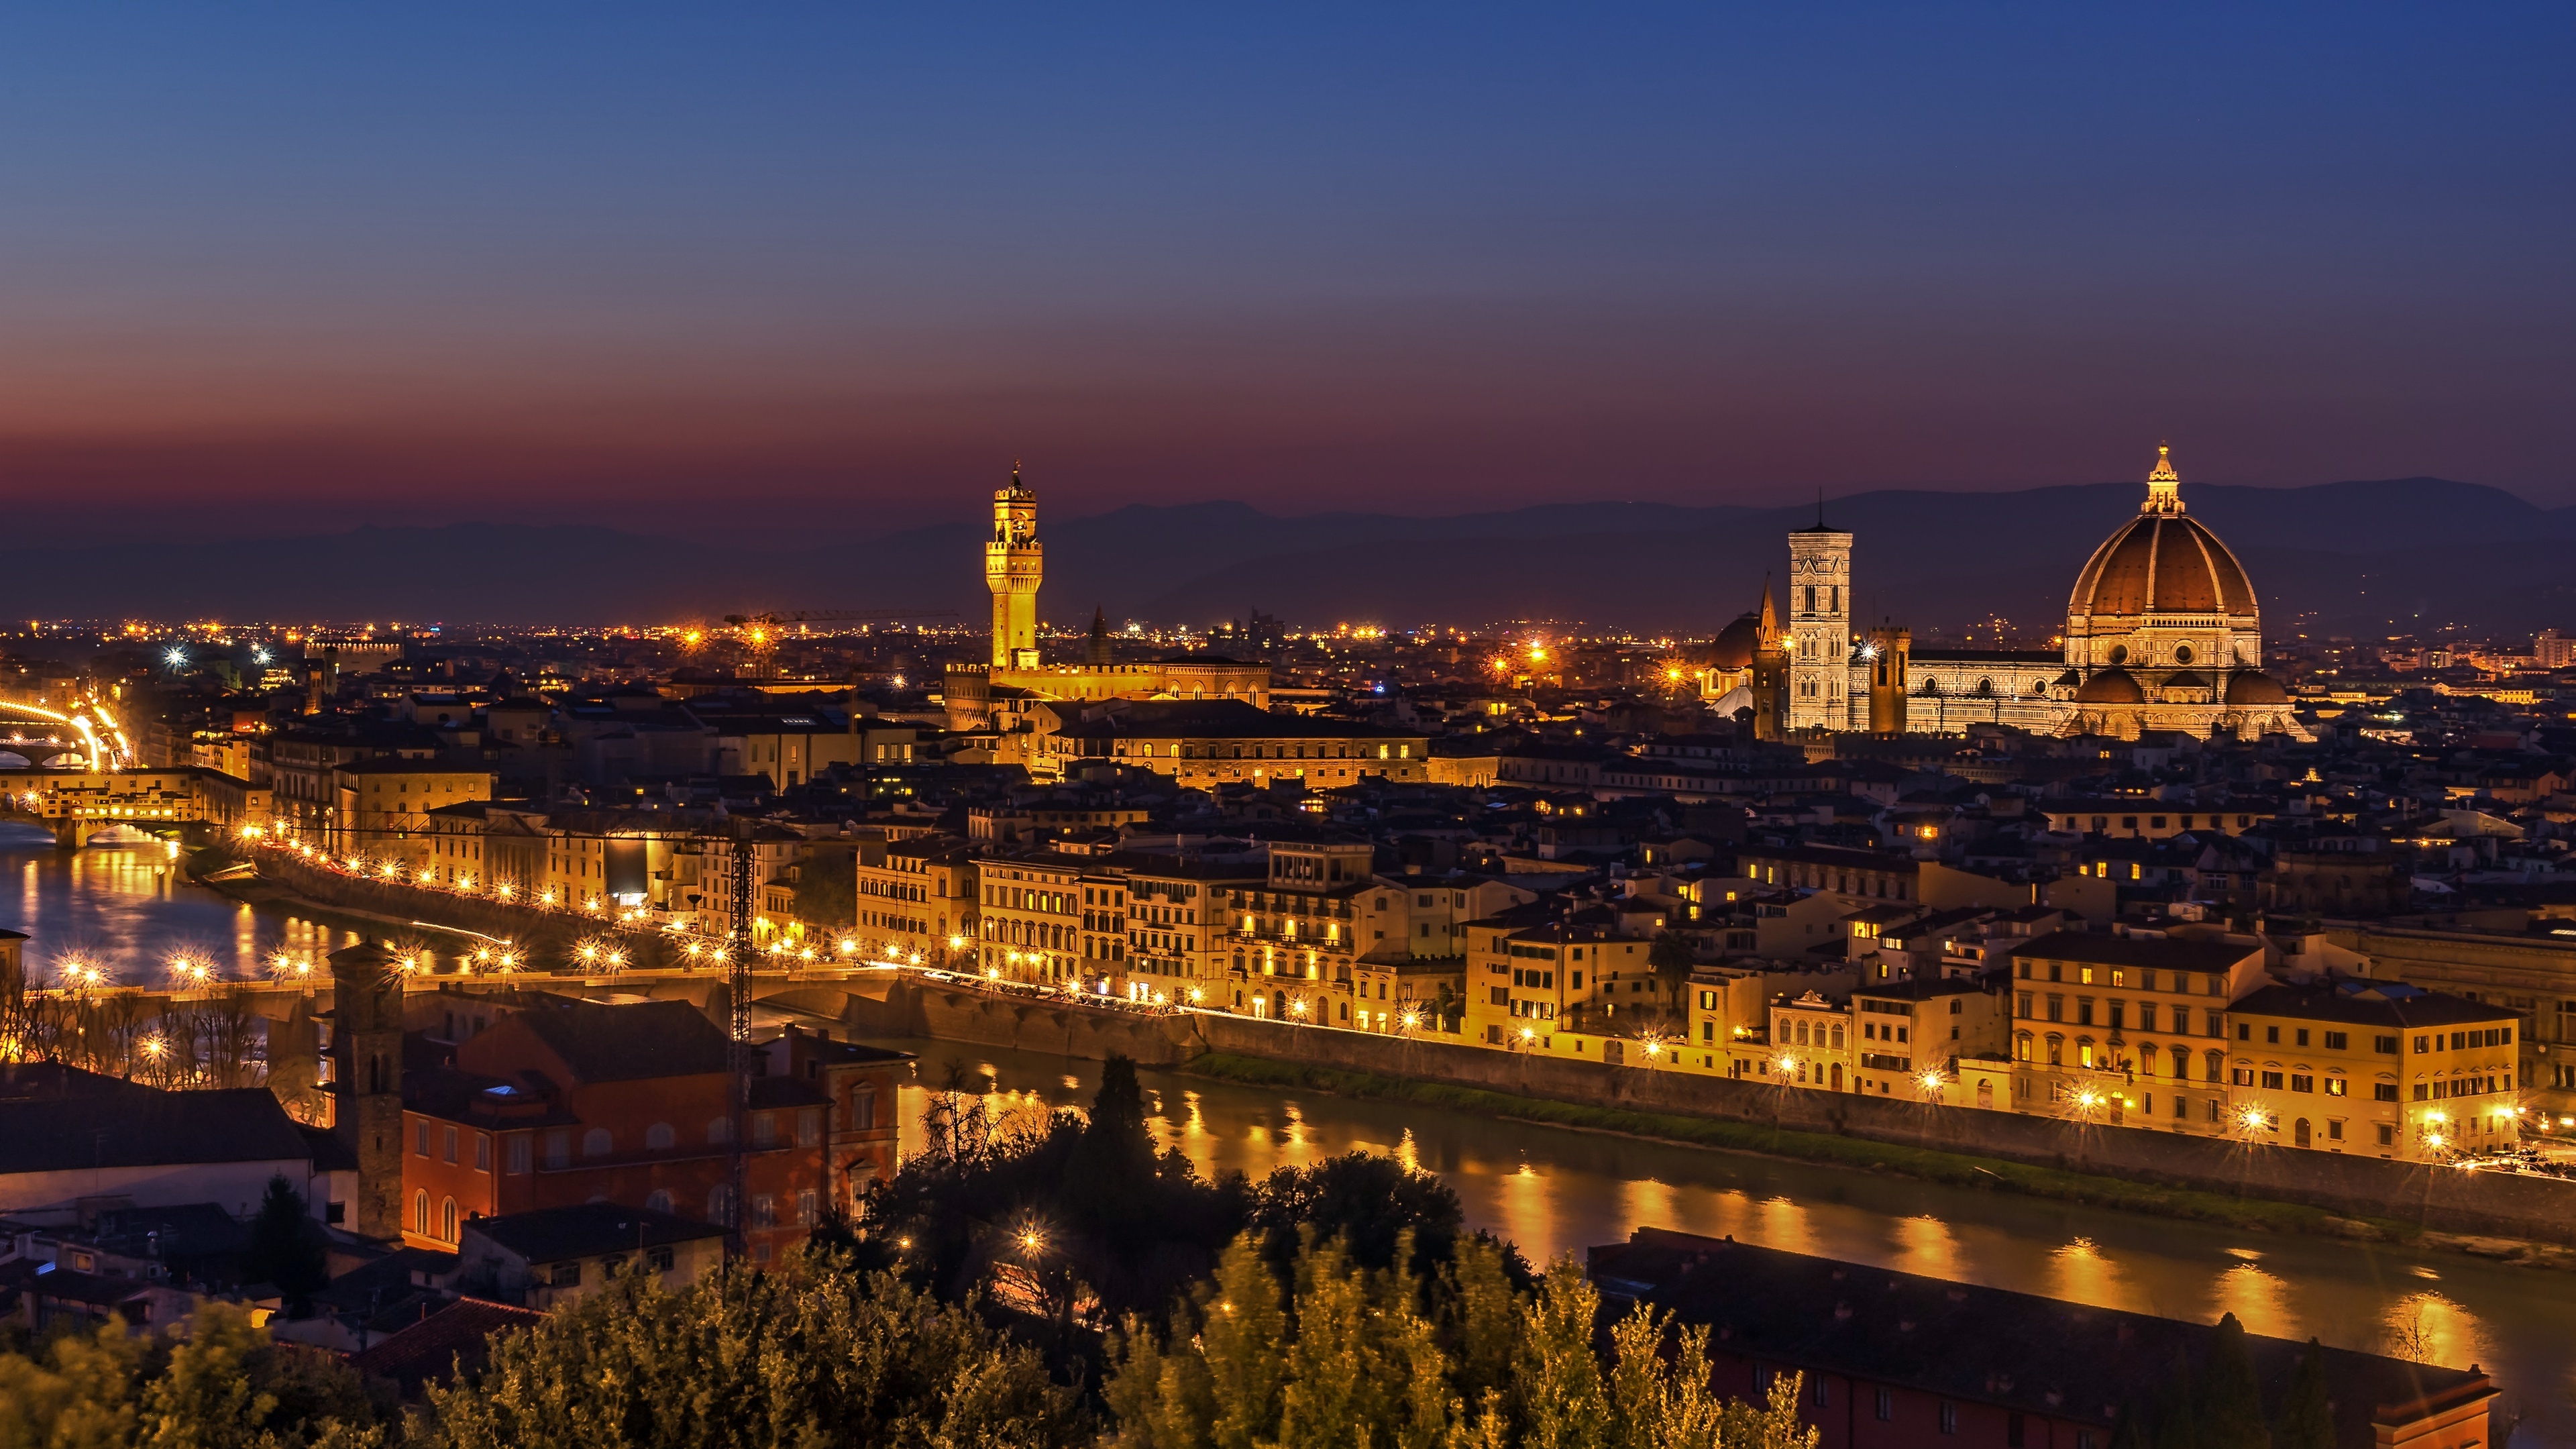 Florence: Historic center, Built on the site of an Etruscan settlement, World Heritage Site, UNESCO. 3840x2160 4K Wallpaper.